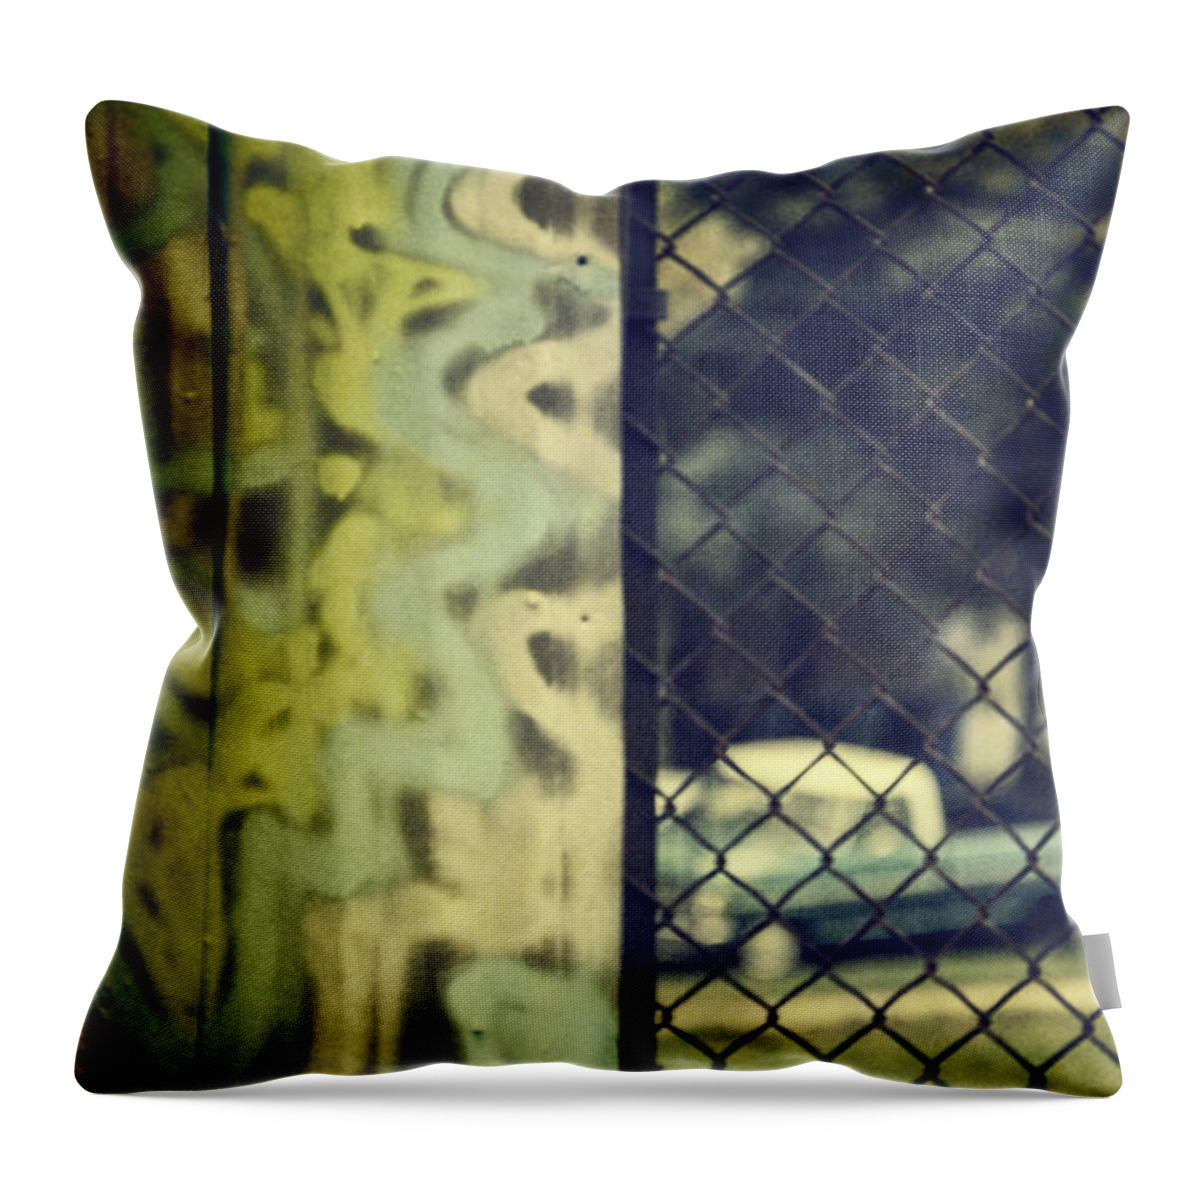 Graffiti Throw Pillow featuring the photograph Junk Yard by Margie Hurwich